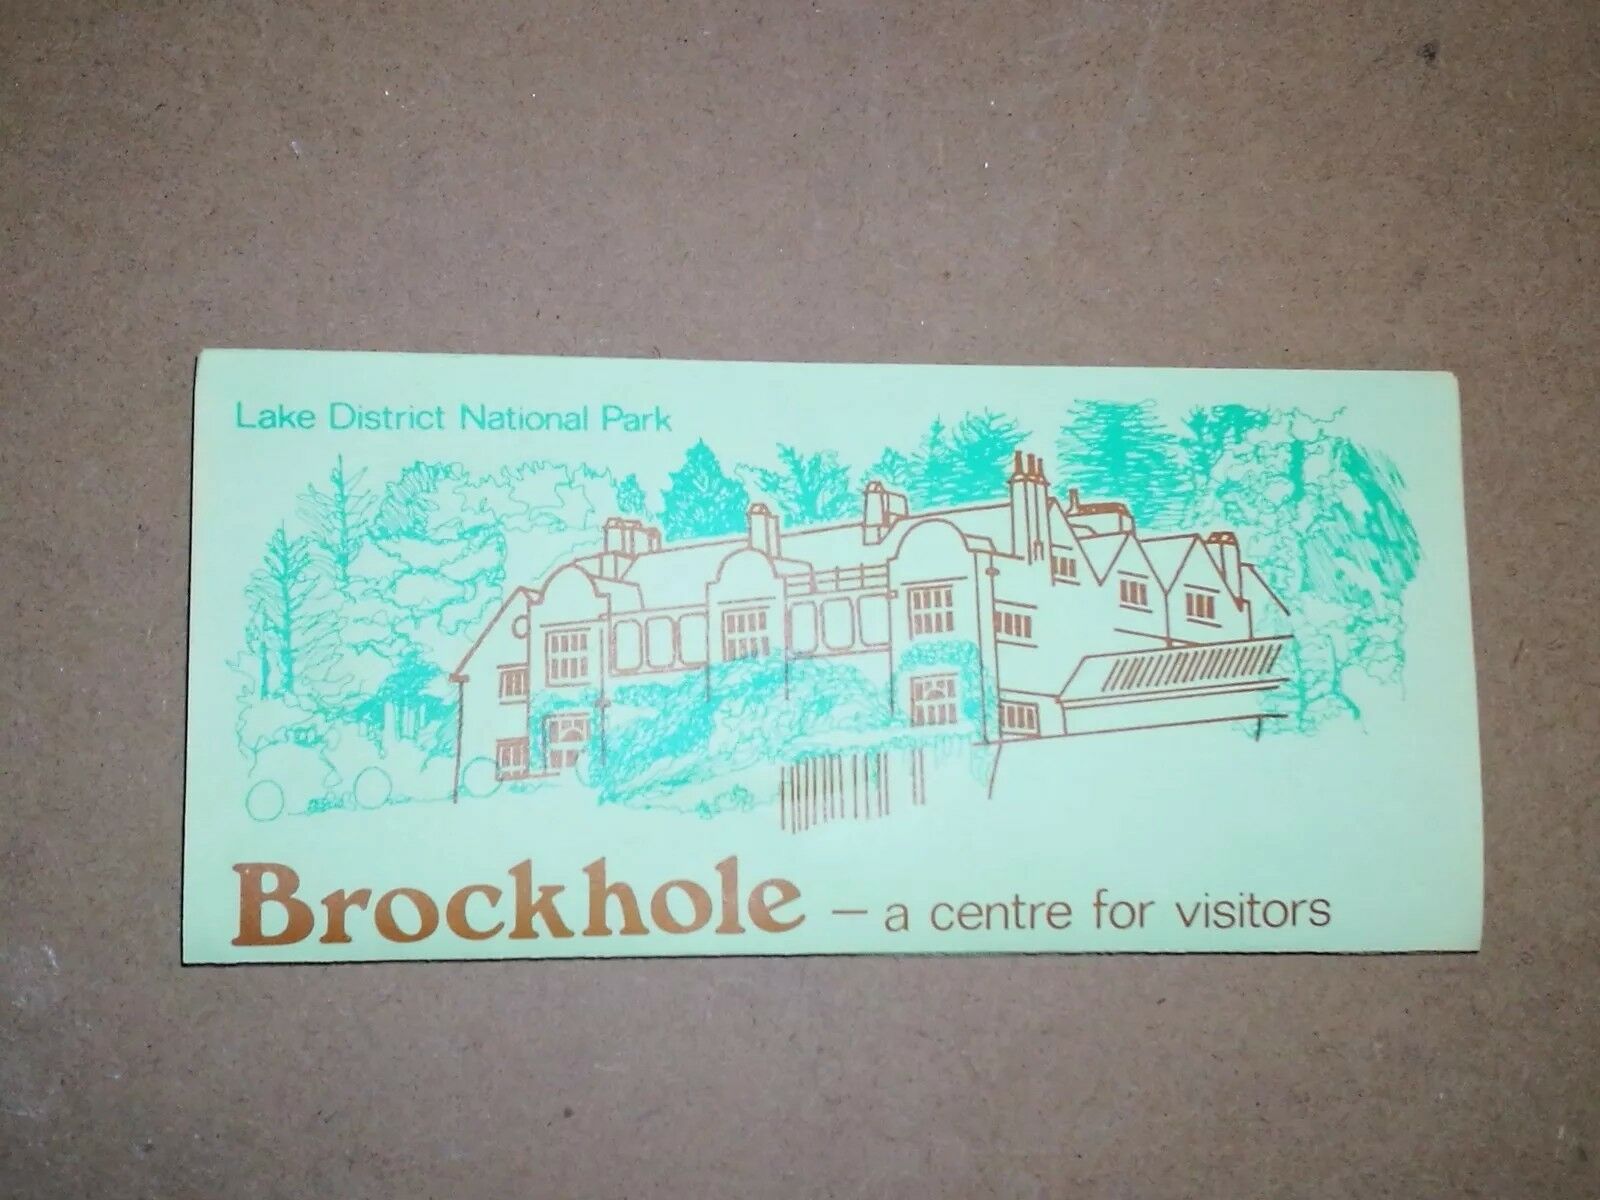 House Clearance - Brockhole Lake District National Park leaflet 6 page 1/3rd A4 format, 1970s